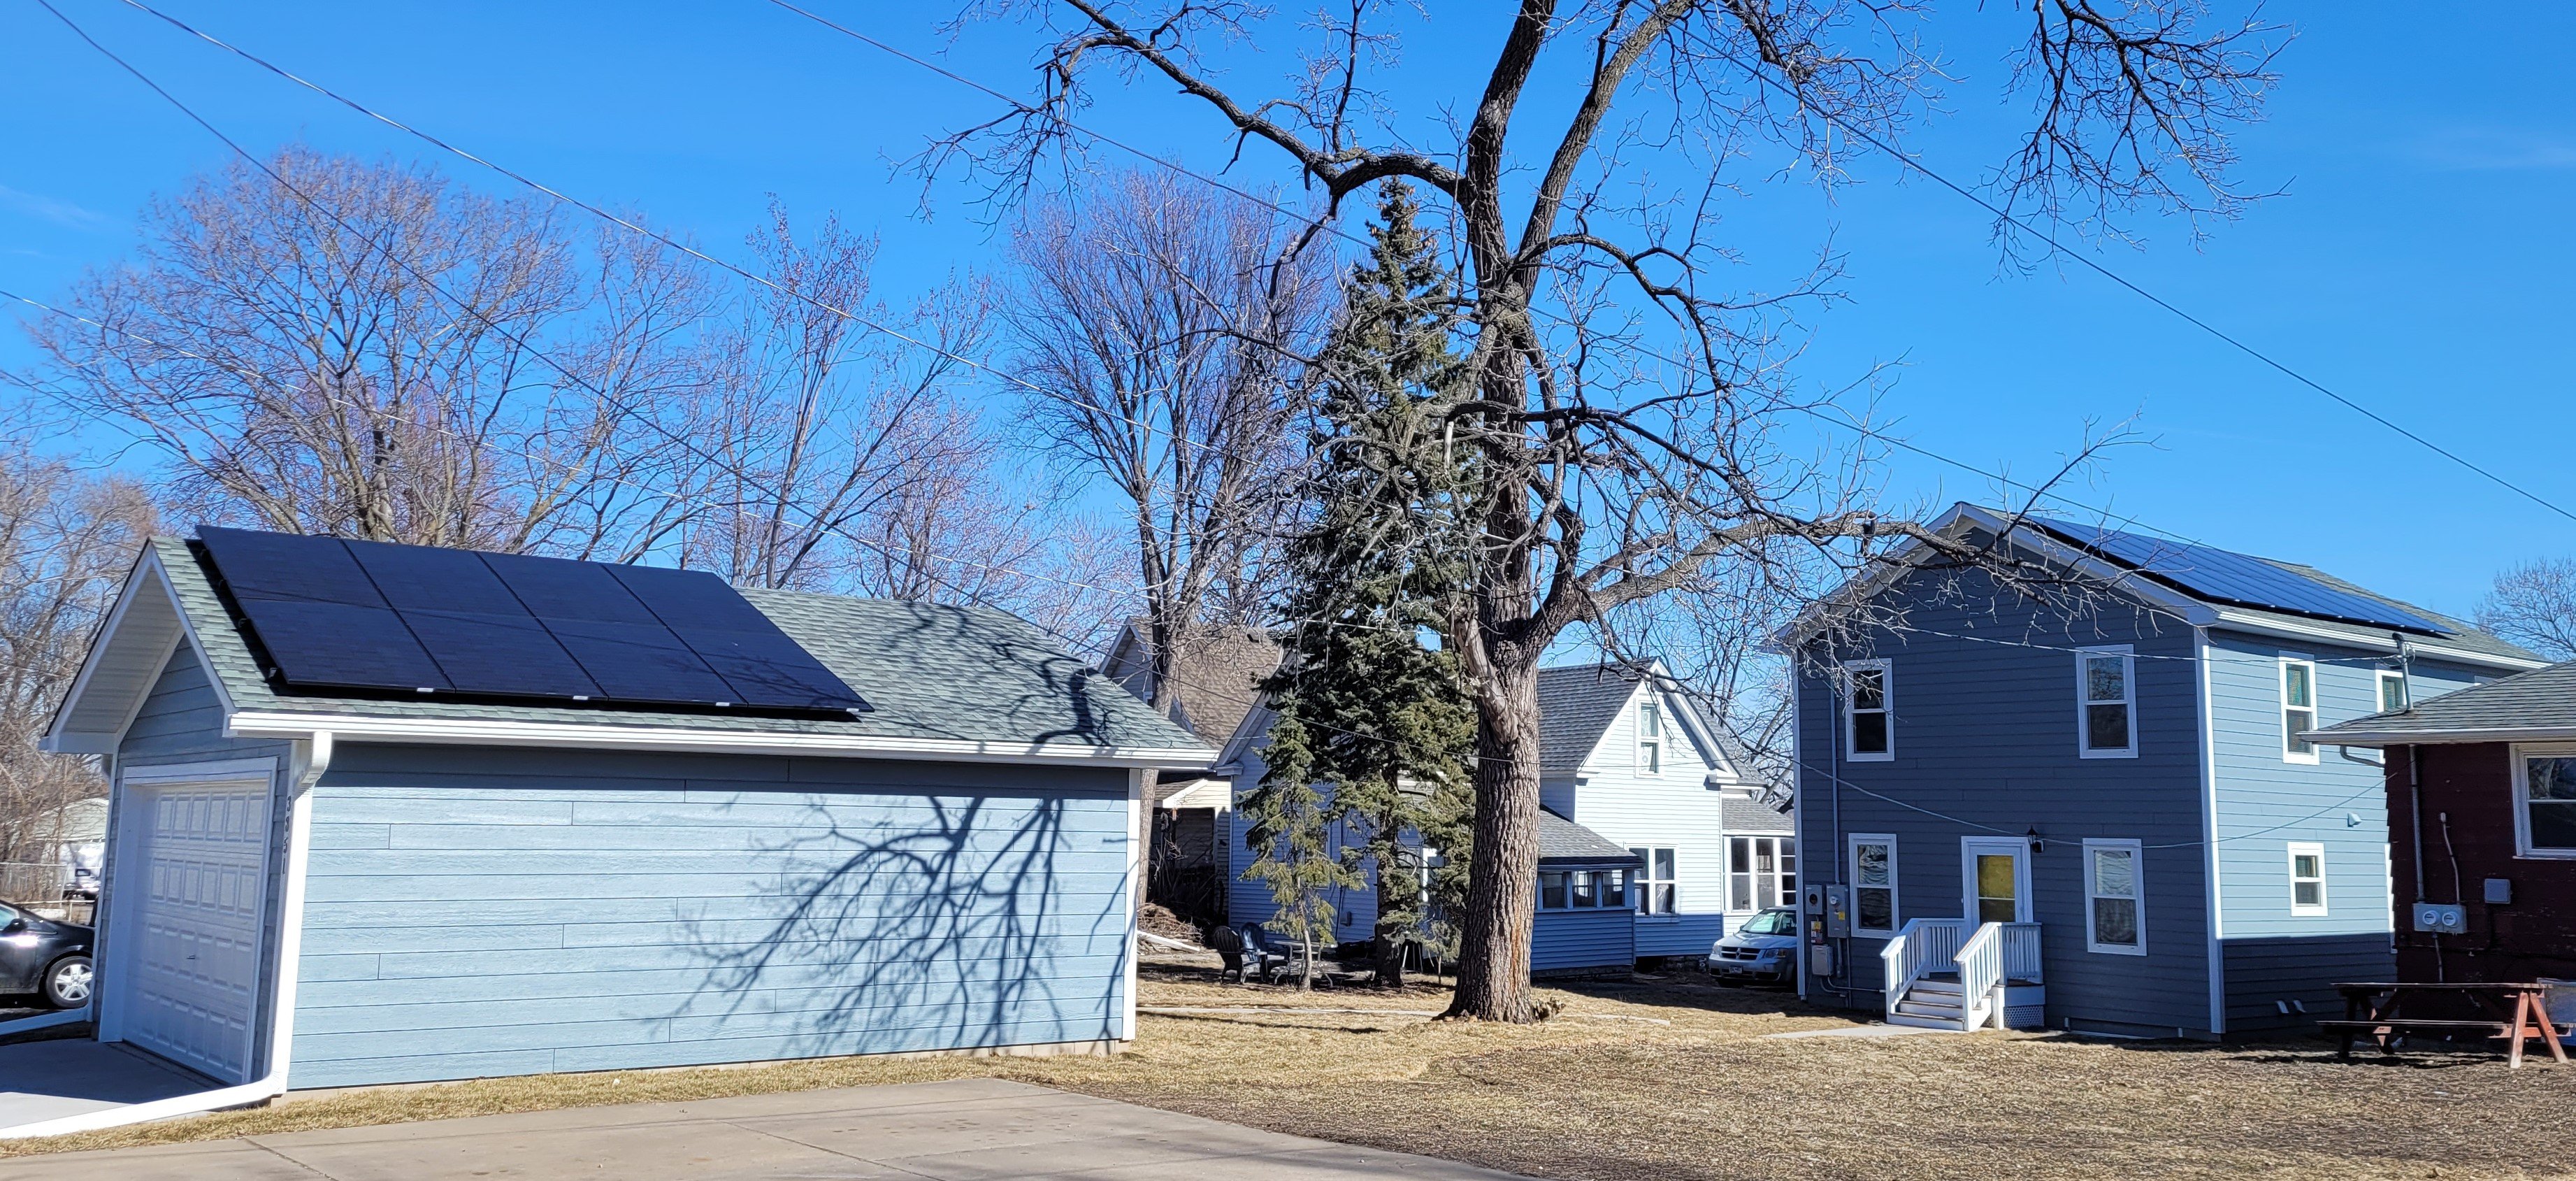 Two solar panels on the garage and roof of a Habitat Home